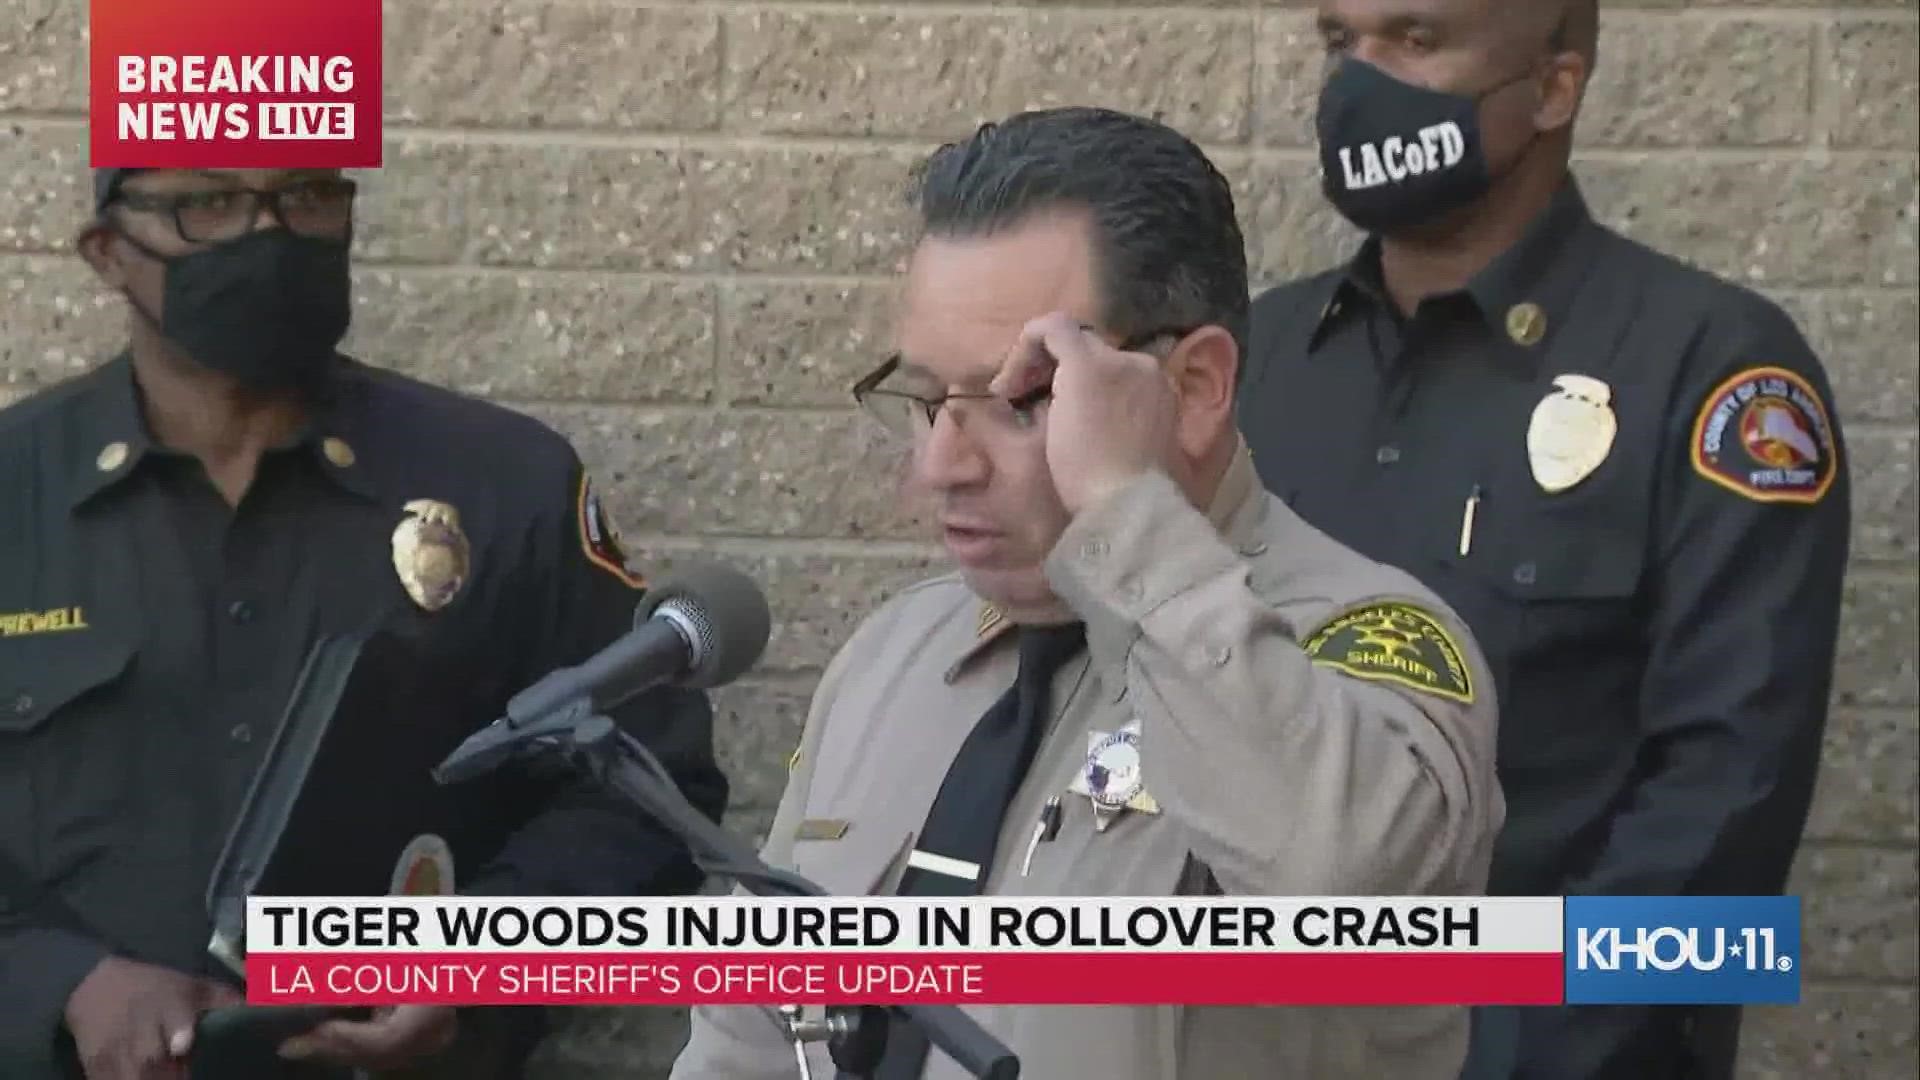 The Los Angeles County Sheriff's Office provides updates after Tiger Woods was injured in a rollover crash.